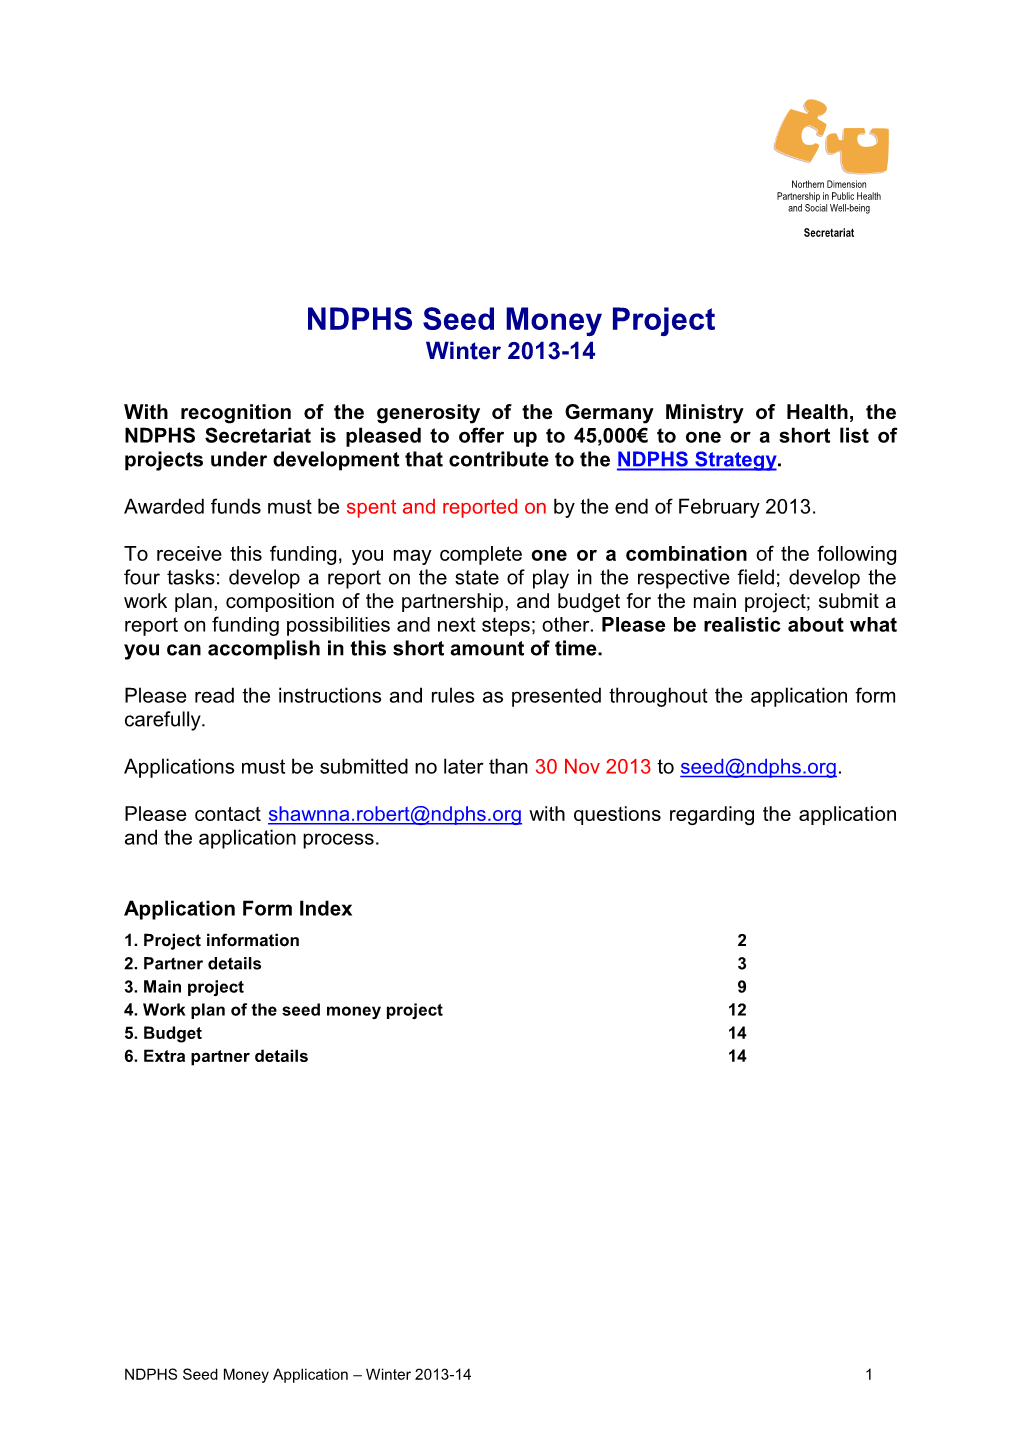 NDPHS Seed Money Project Winter 2013-14